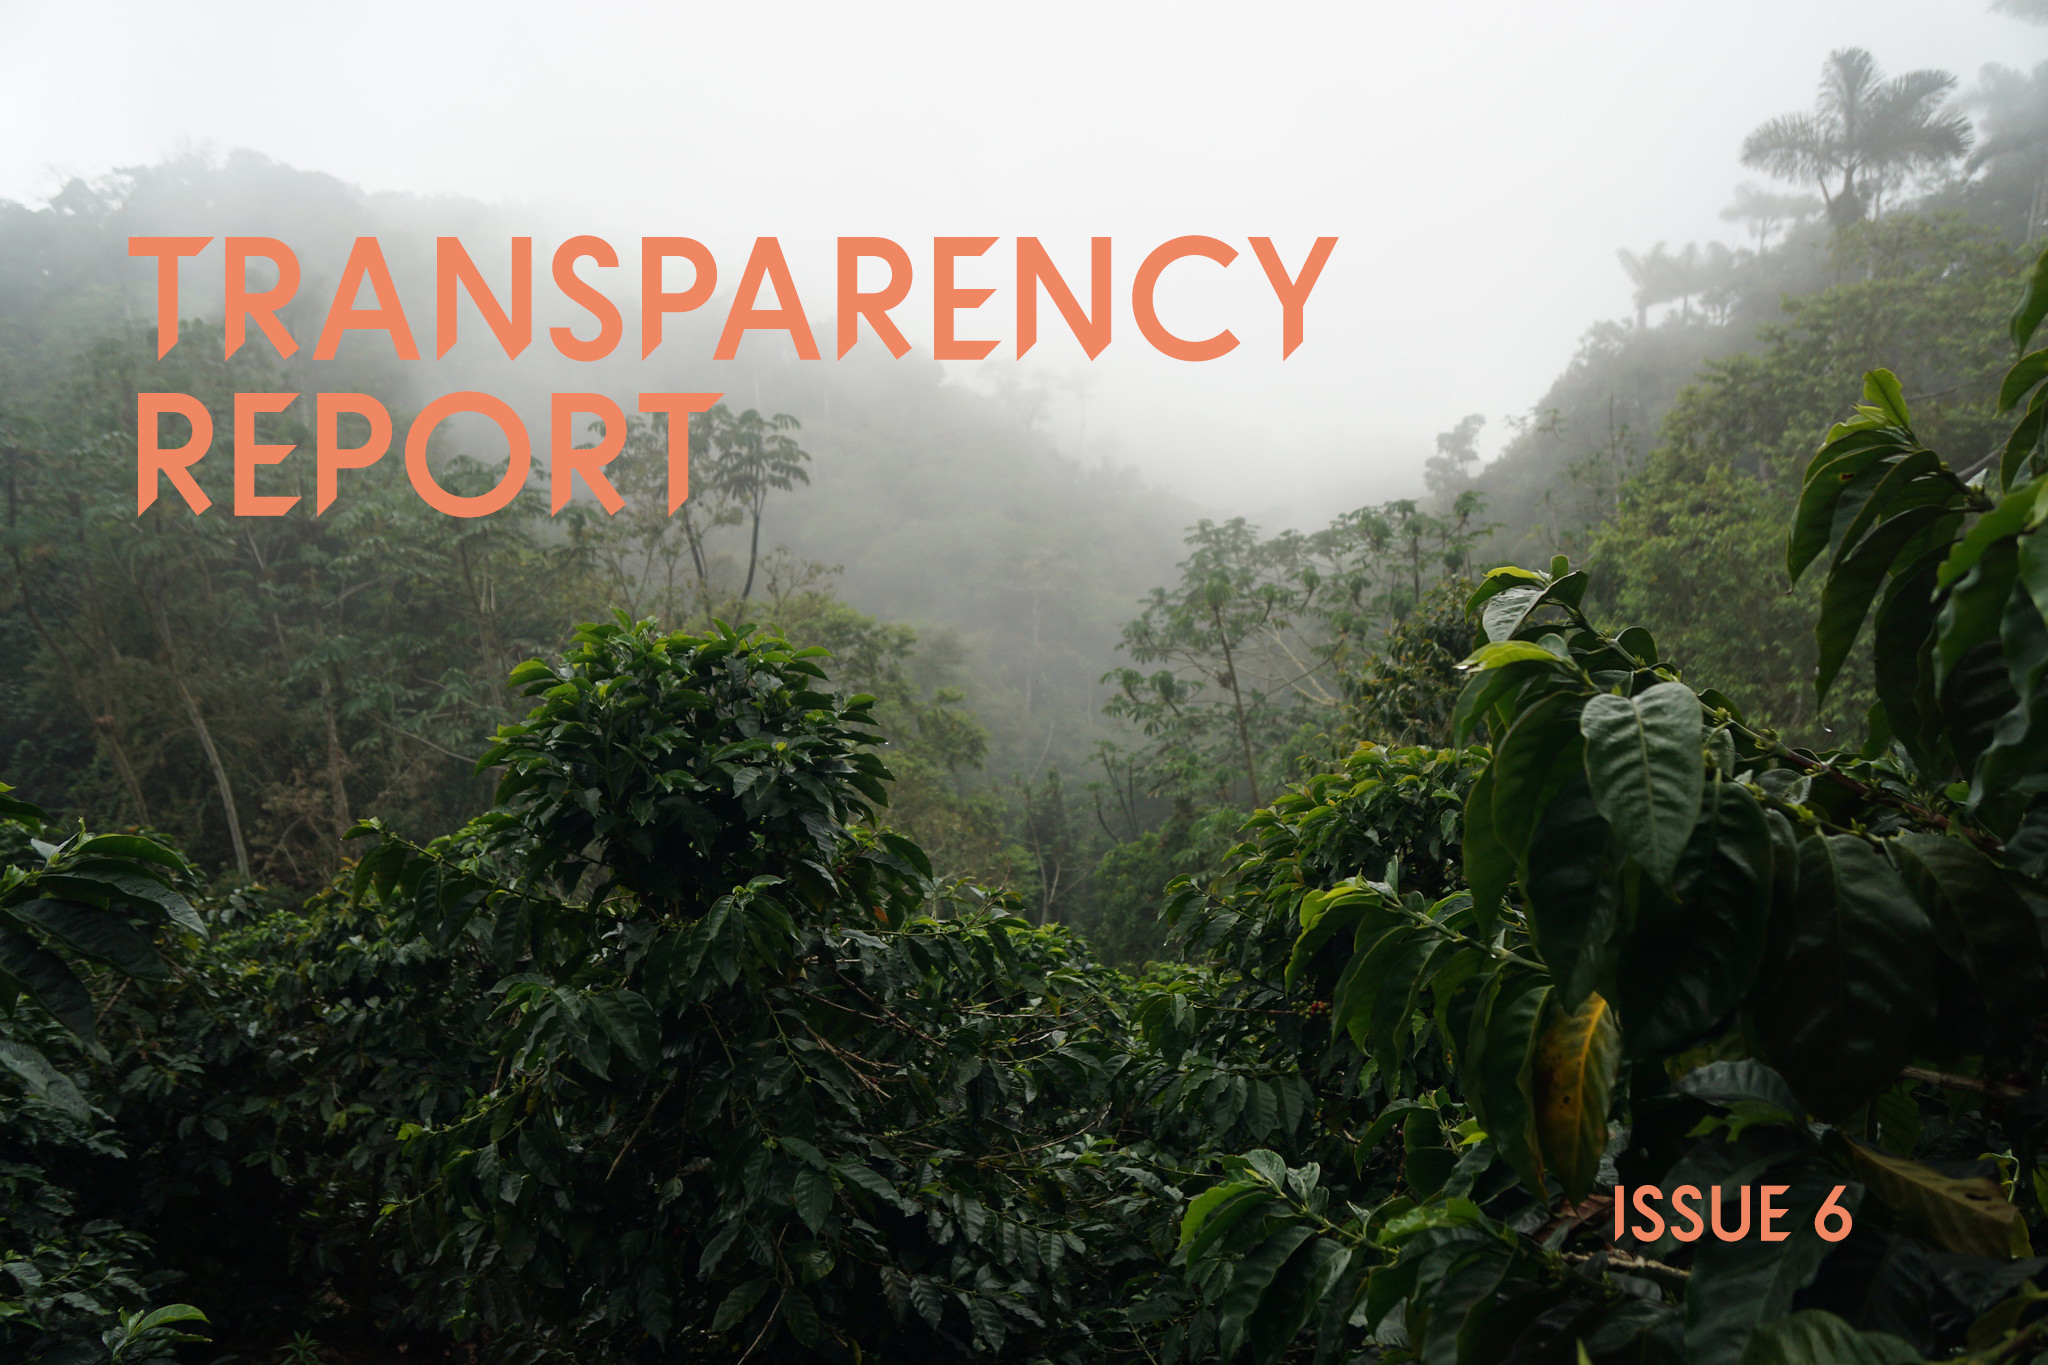 Our latest issue of Transparency Report if here!